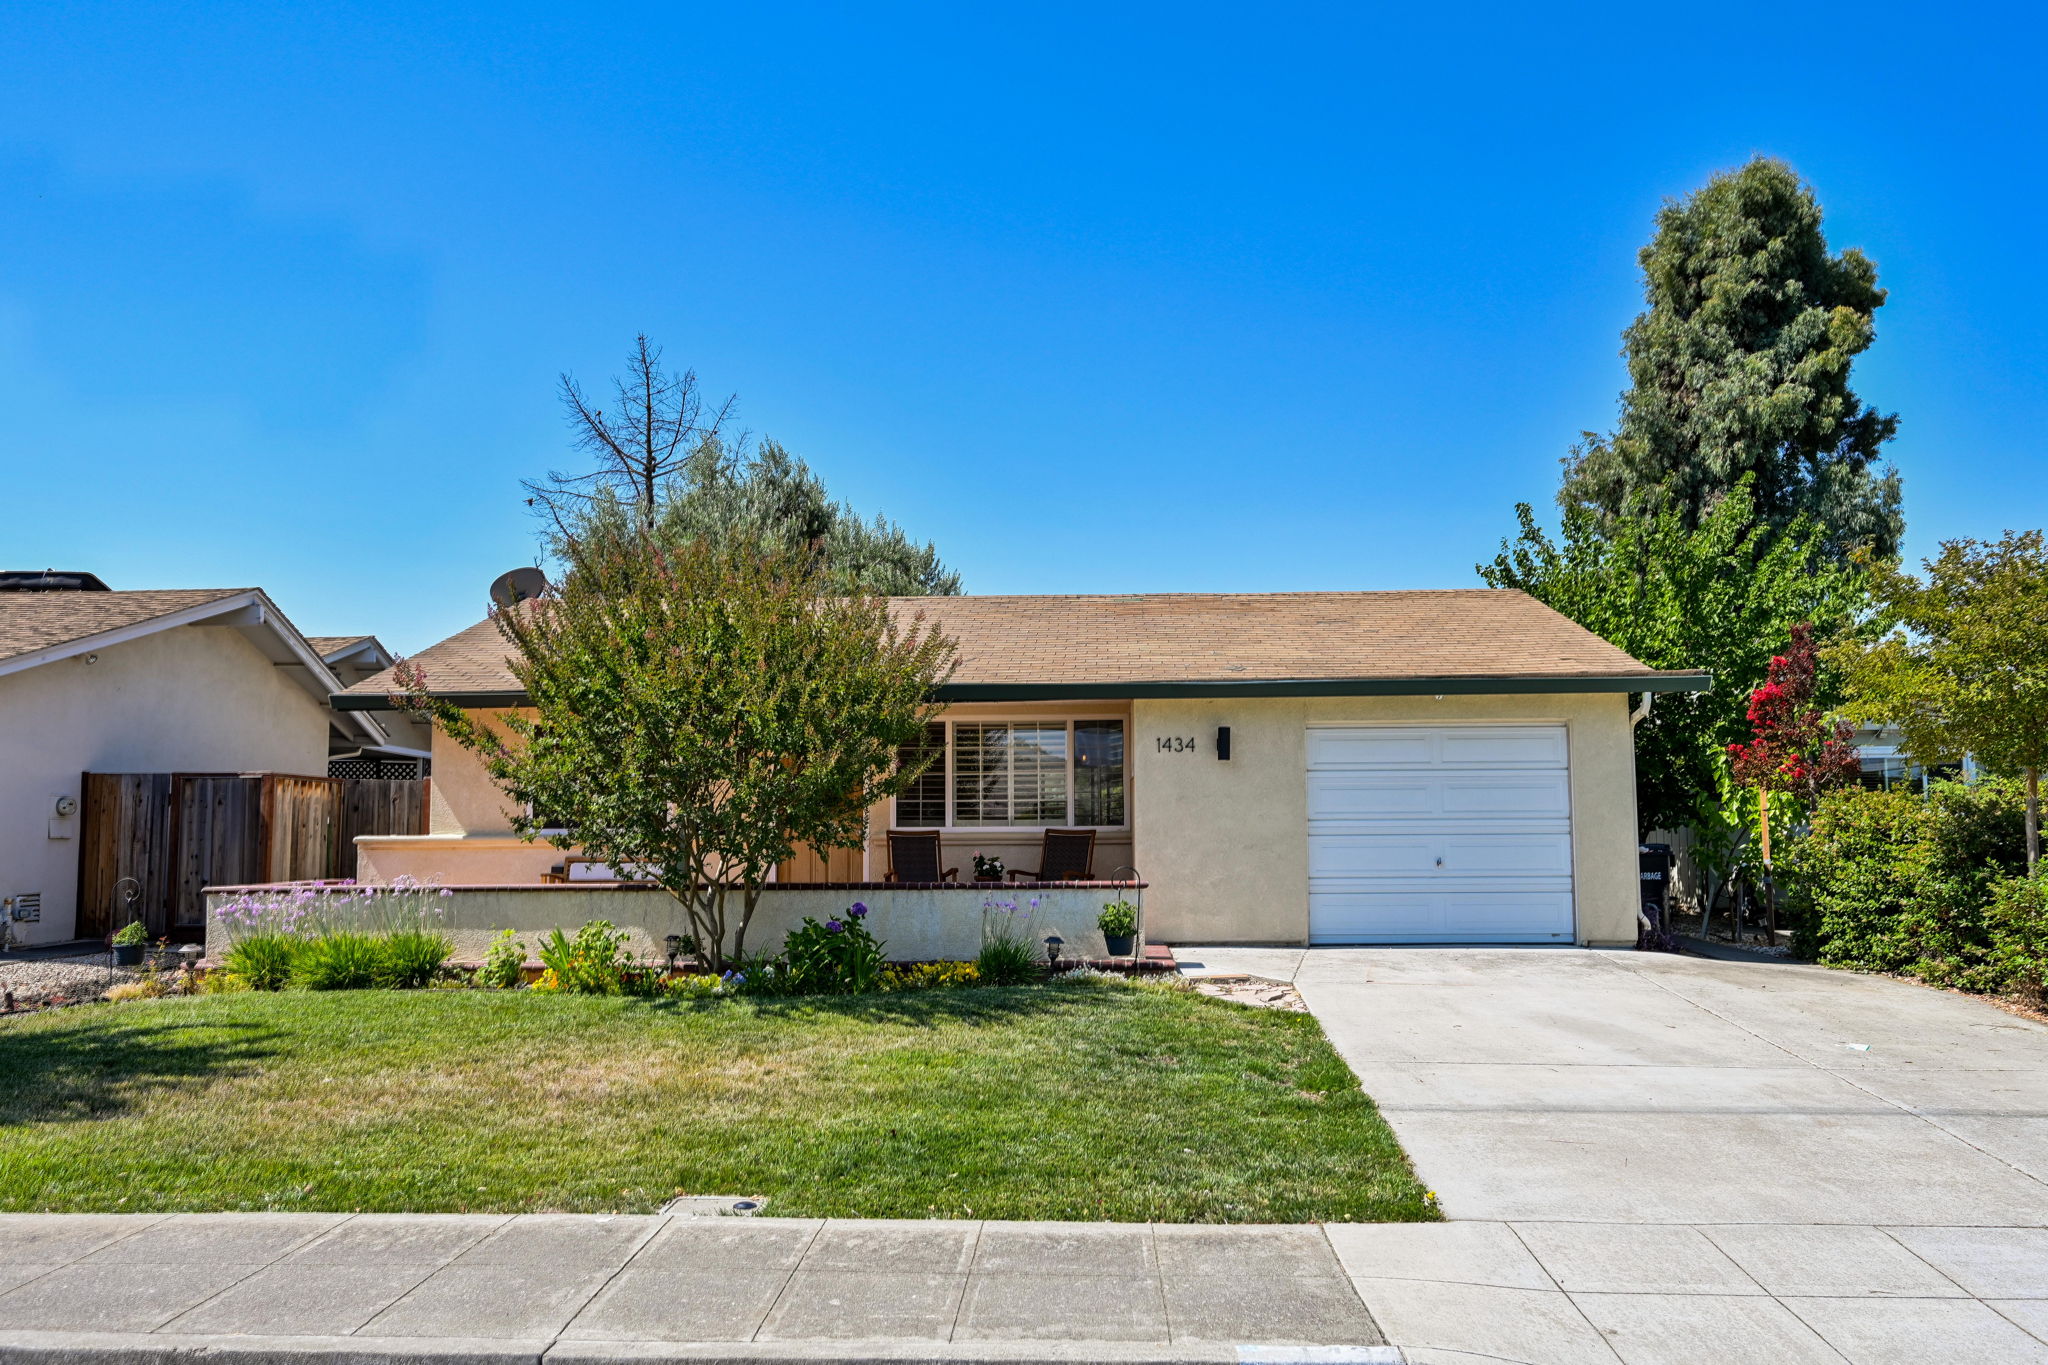  1434 Bluebell Dr, Livermore, CA 94551, US